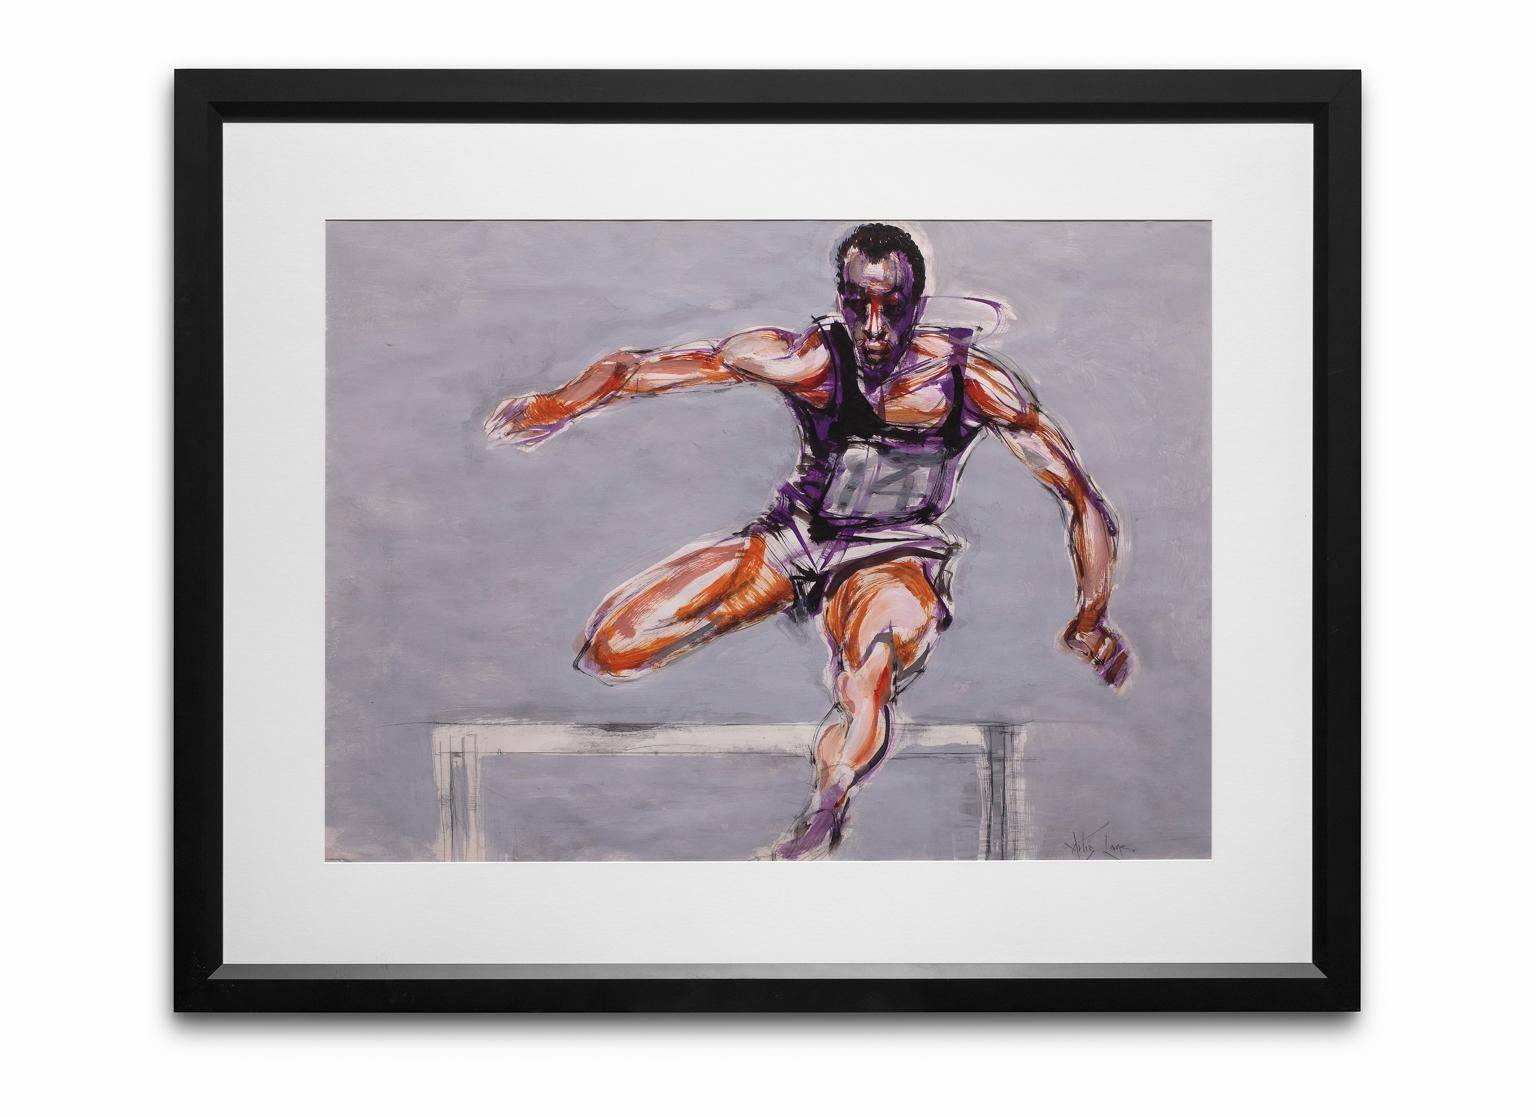 "Jesse Owens - Long Jump Medalist", Mixed Media on Paper